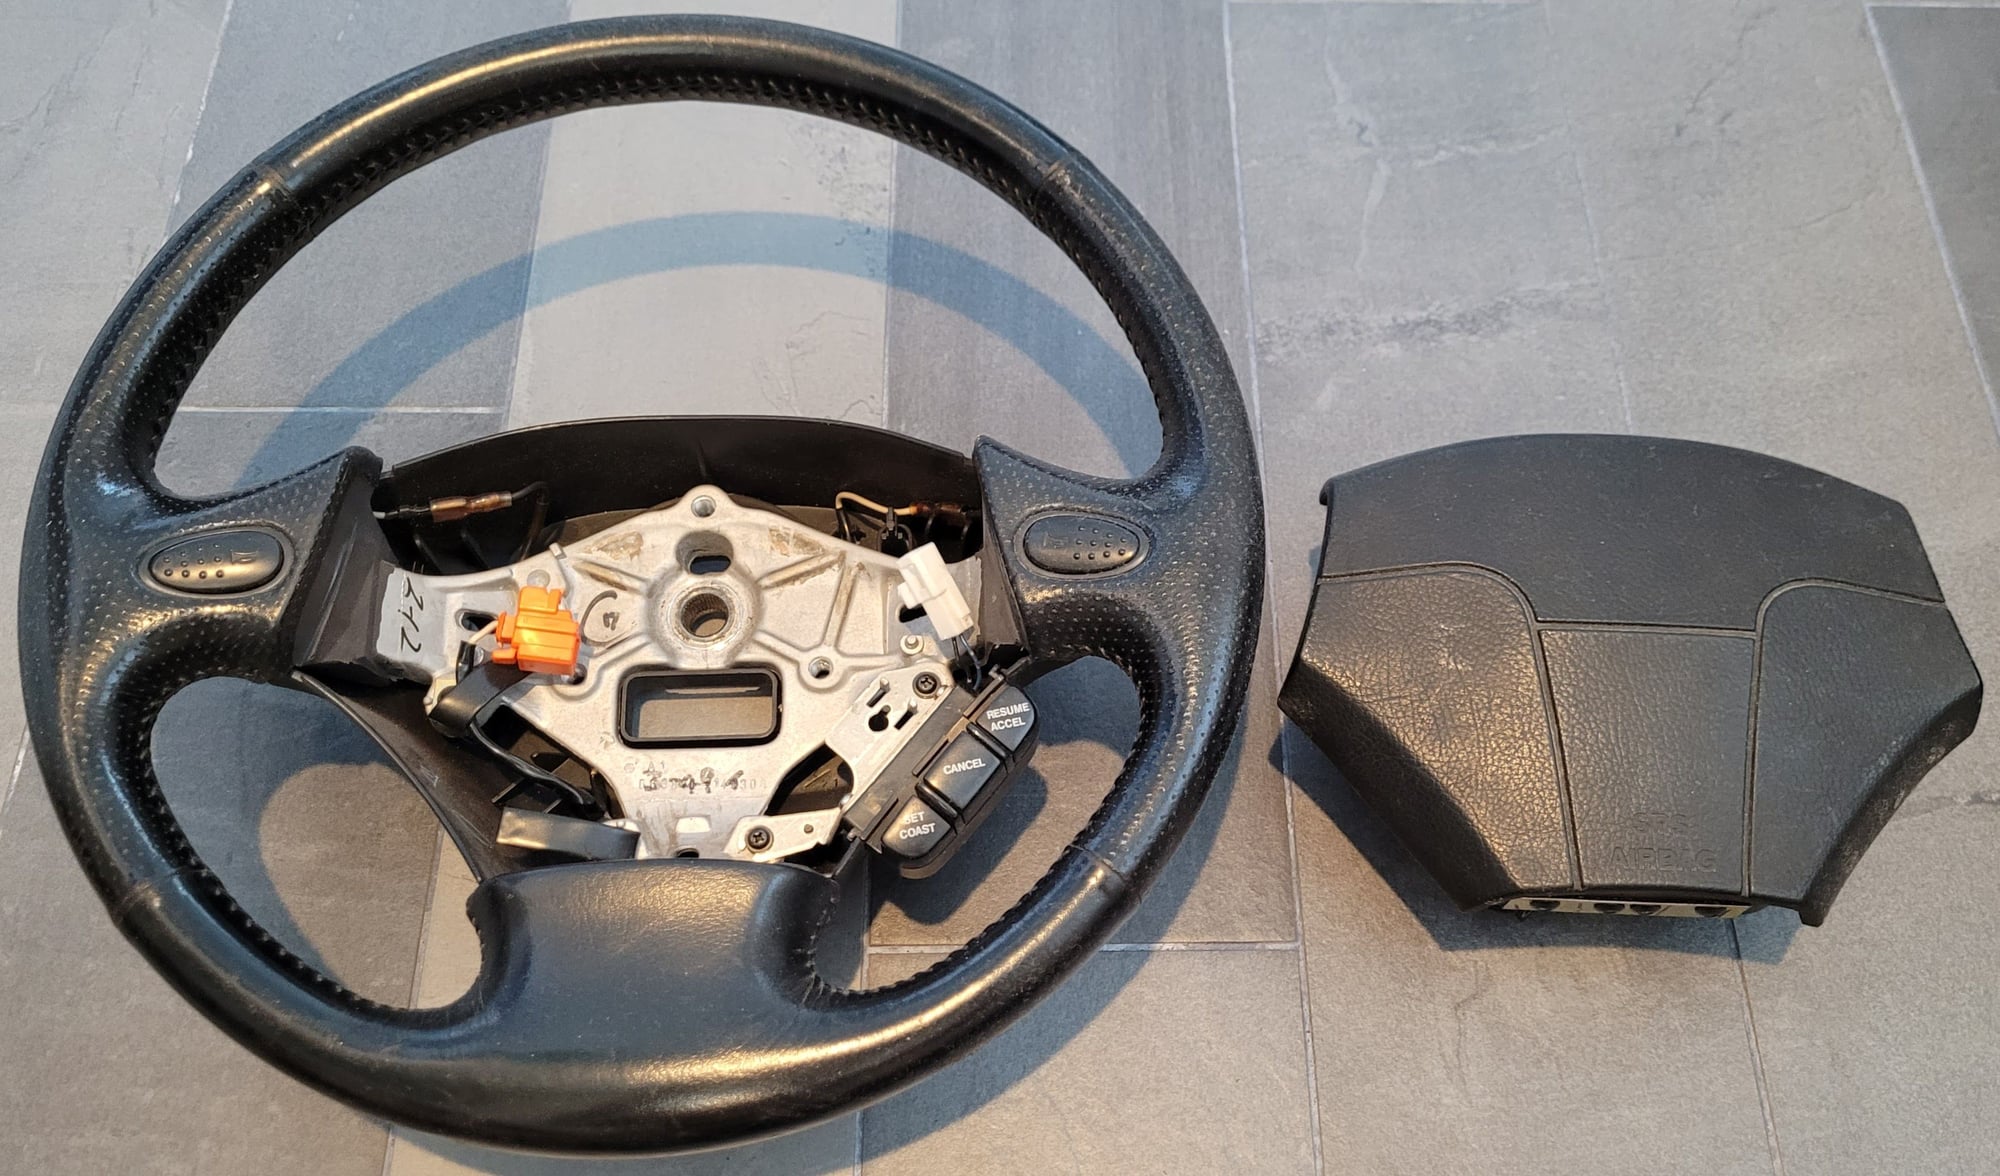 Interior/Upholstery - Steering Wheels, Dash Panels, ECU R1 Bar Feet, Center Amp, Other Bits - Used - 1993 to 1995 Mazda RX-7 - Clifton, NJ 07012, United States